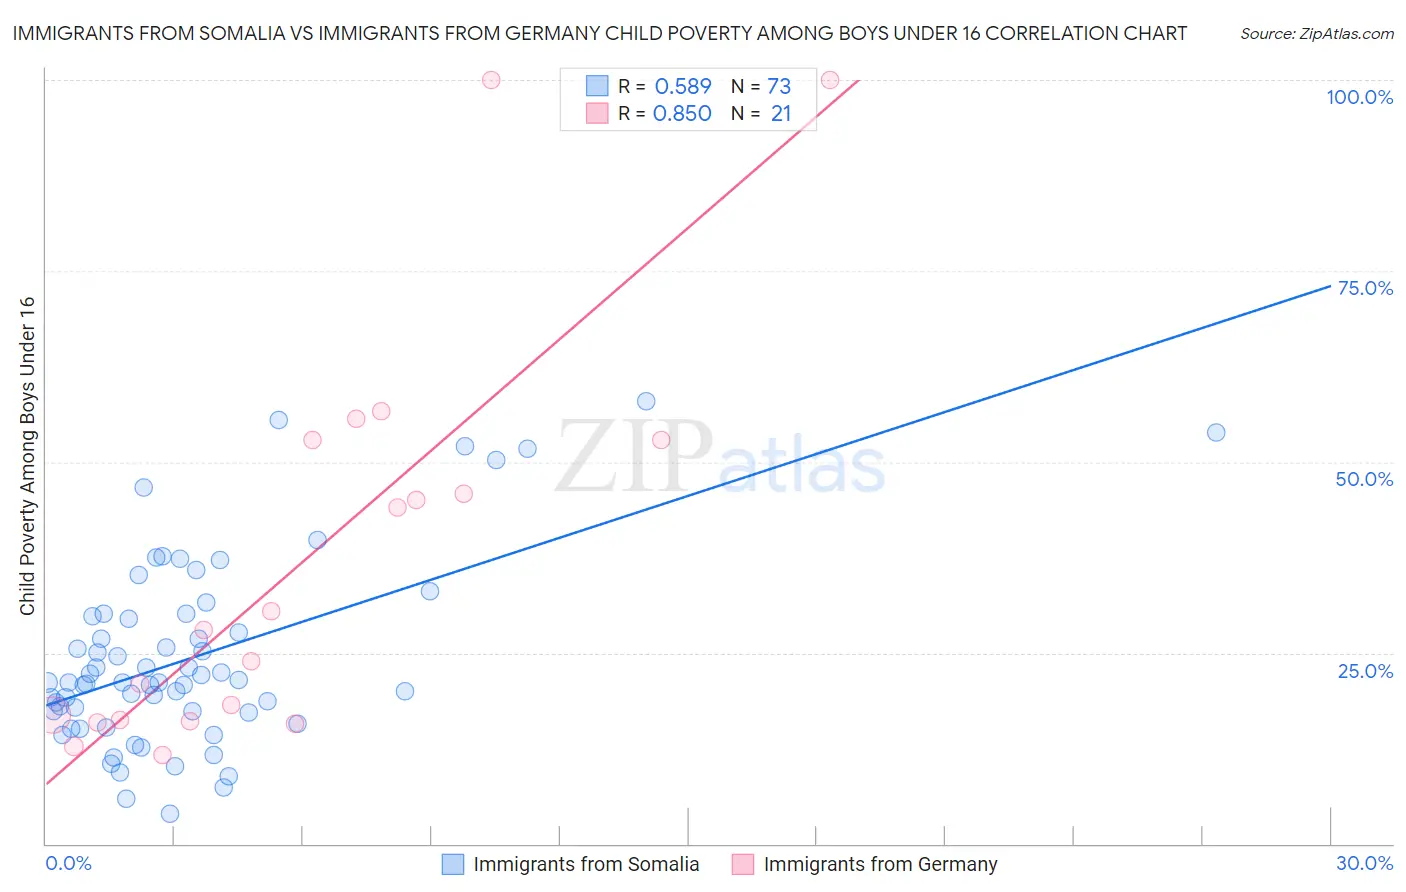 Immigrants from Somalia vs Immigrants from Germany Child Poverty Among Boys Under 16